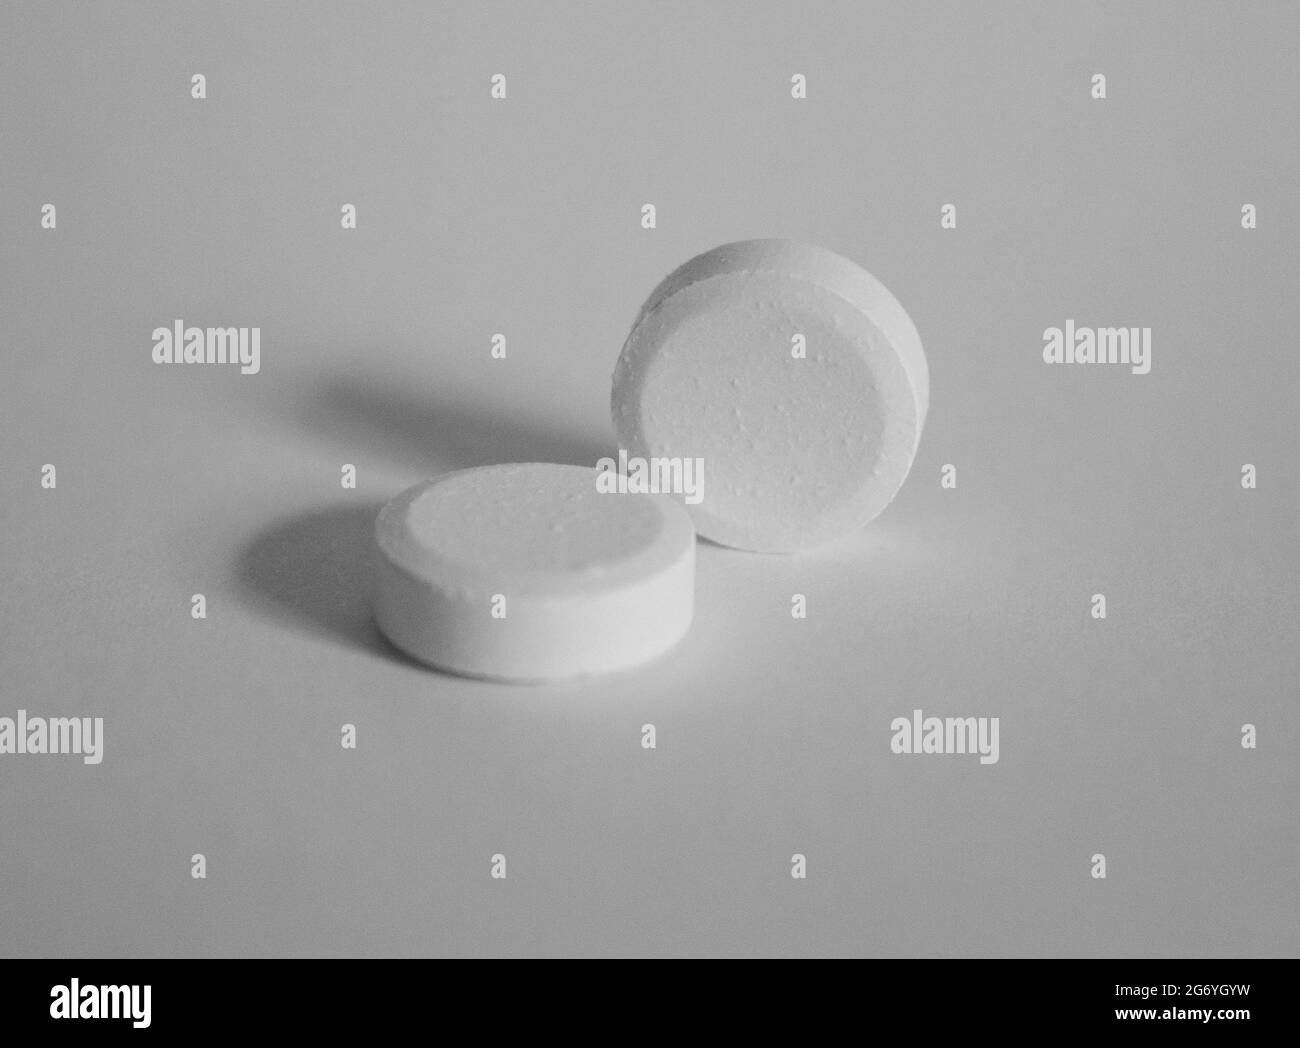 Black and white close-up of two paracetamol tablets Stock Photo